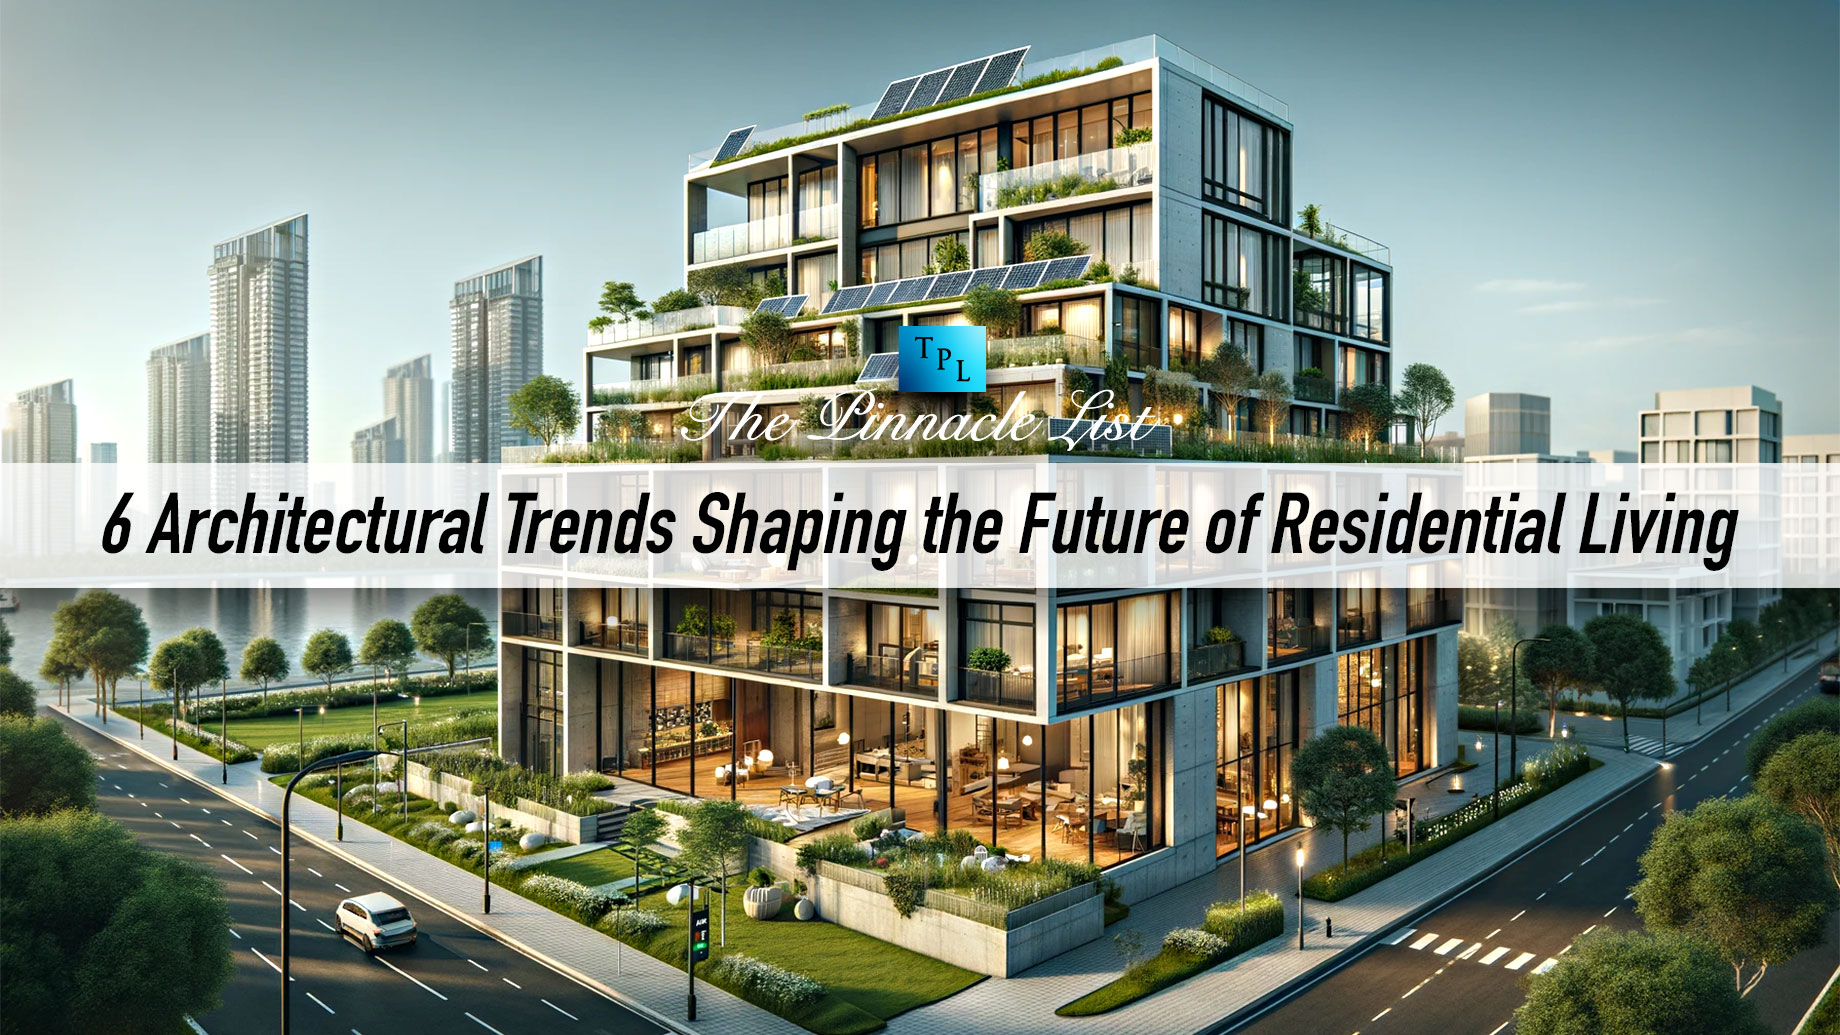 6 Architectural Trends Shaping the Future of Residential Living